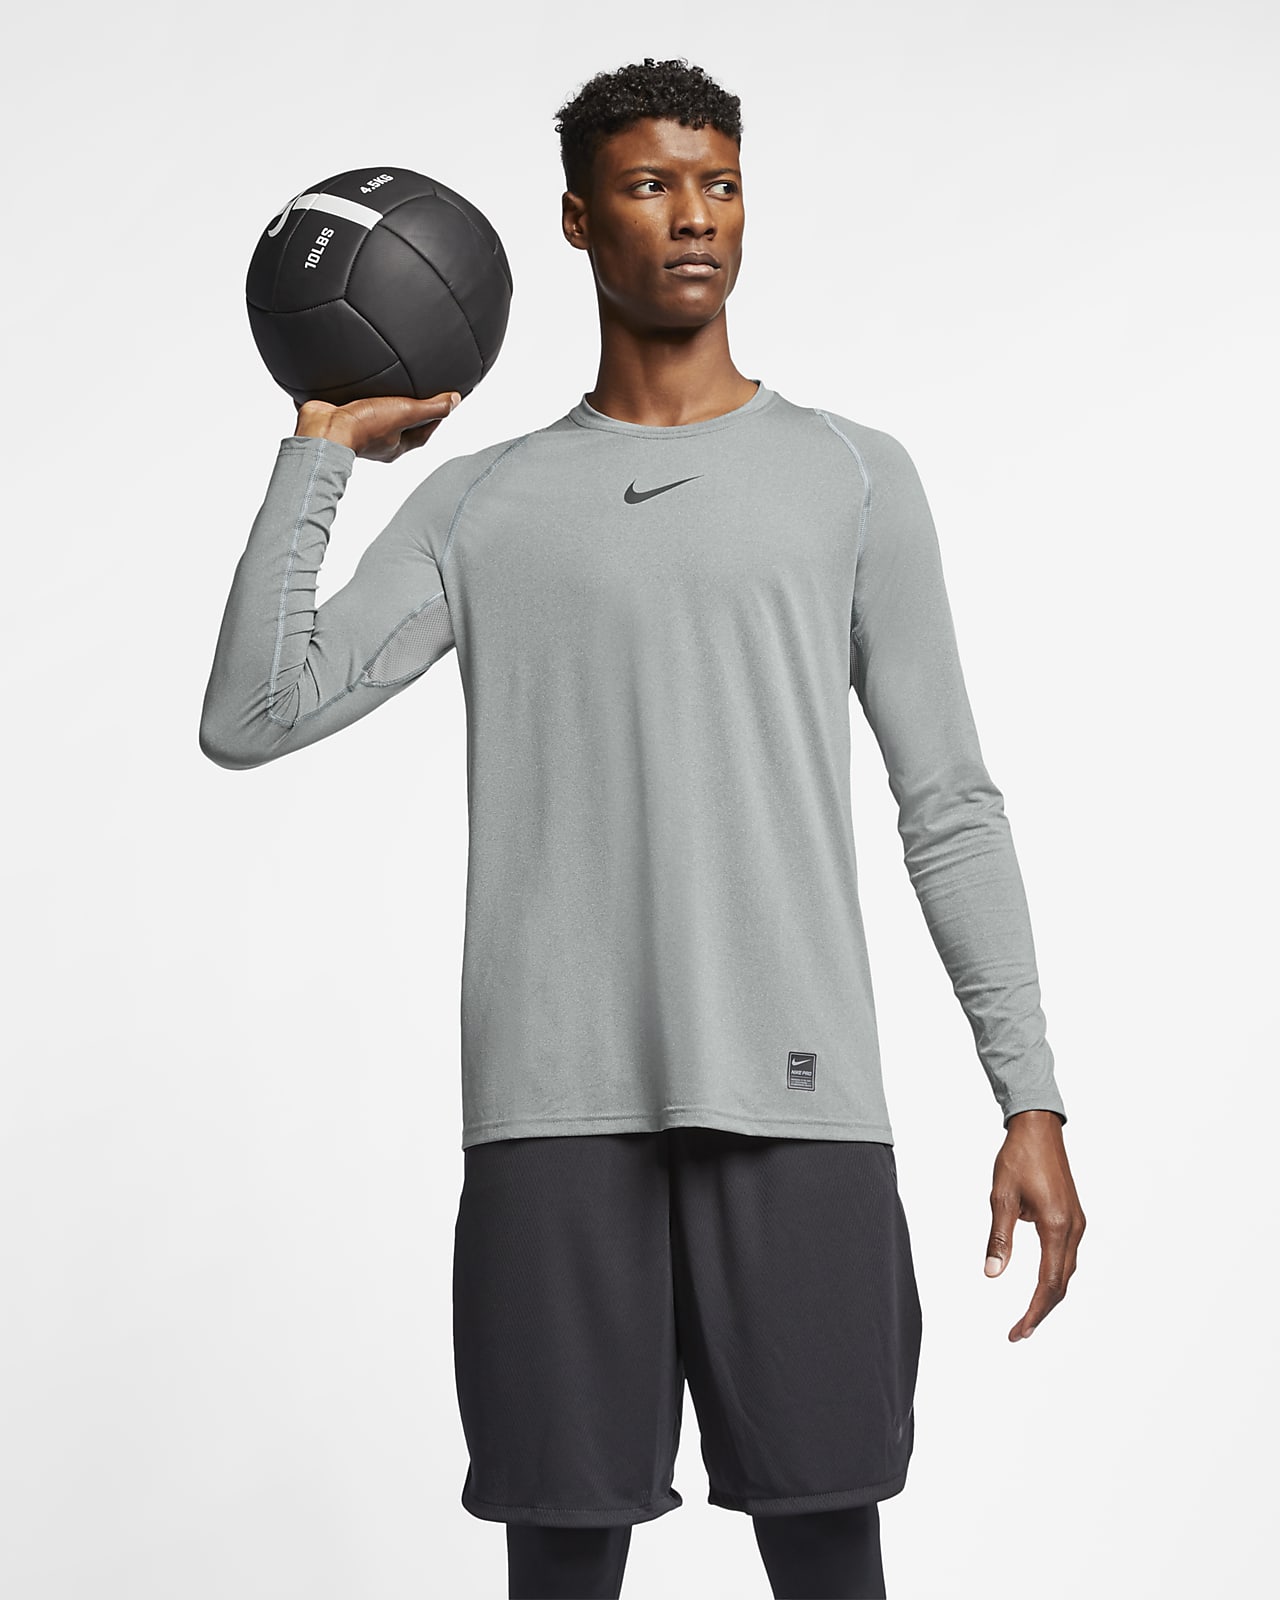 Nike Pro Top Men's Fitted Long-Sleeve Top. Nike.com